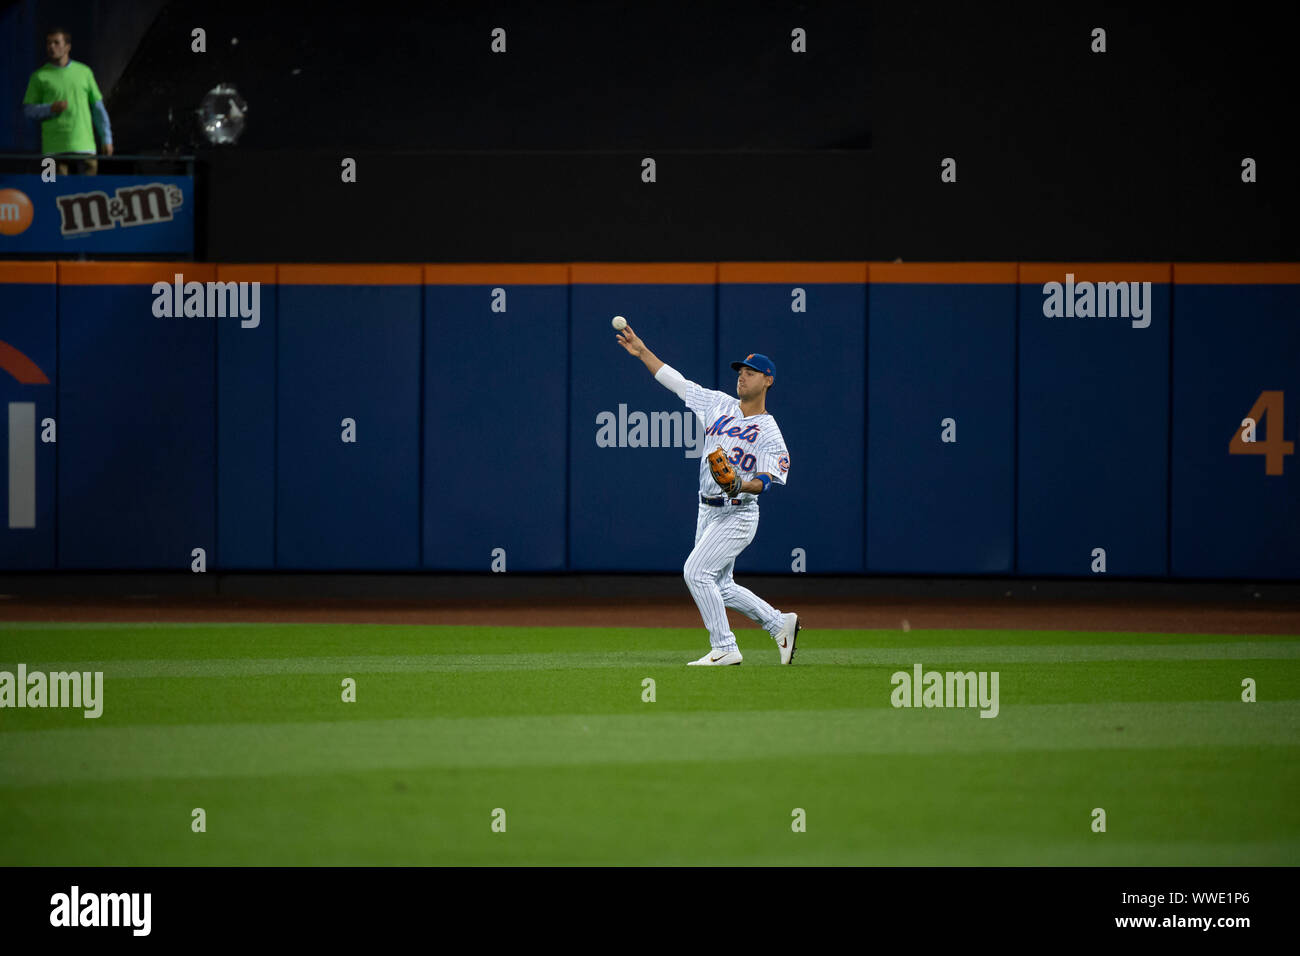 Queens, New York, USA. 13th Sep, 2019. New York Mets right fielder Michael Conforto (30) throws the ball back into the infield during the game between The New York Mets and The Los Angeles Dodgers at Citi Field in Queens, New York. Mandatory credit: Kostas Lymperopoulos/CSM/Alamy Live News Stock Photo